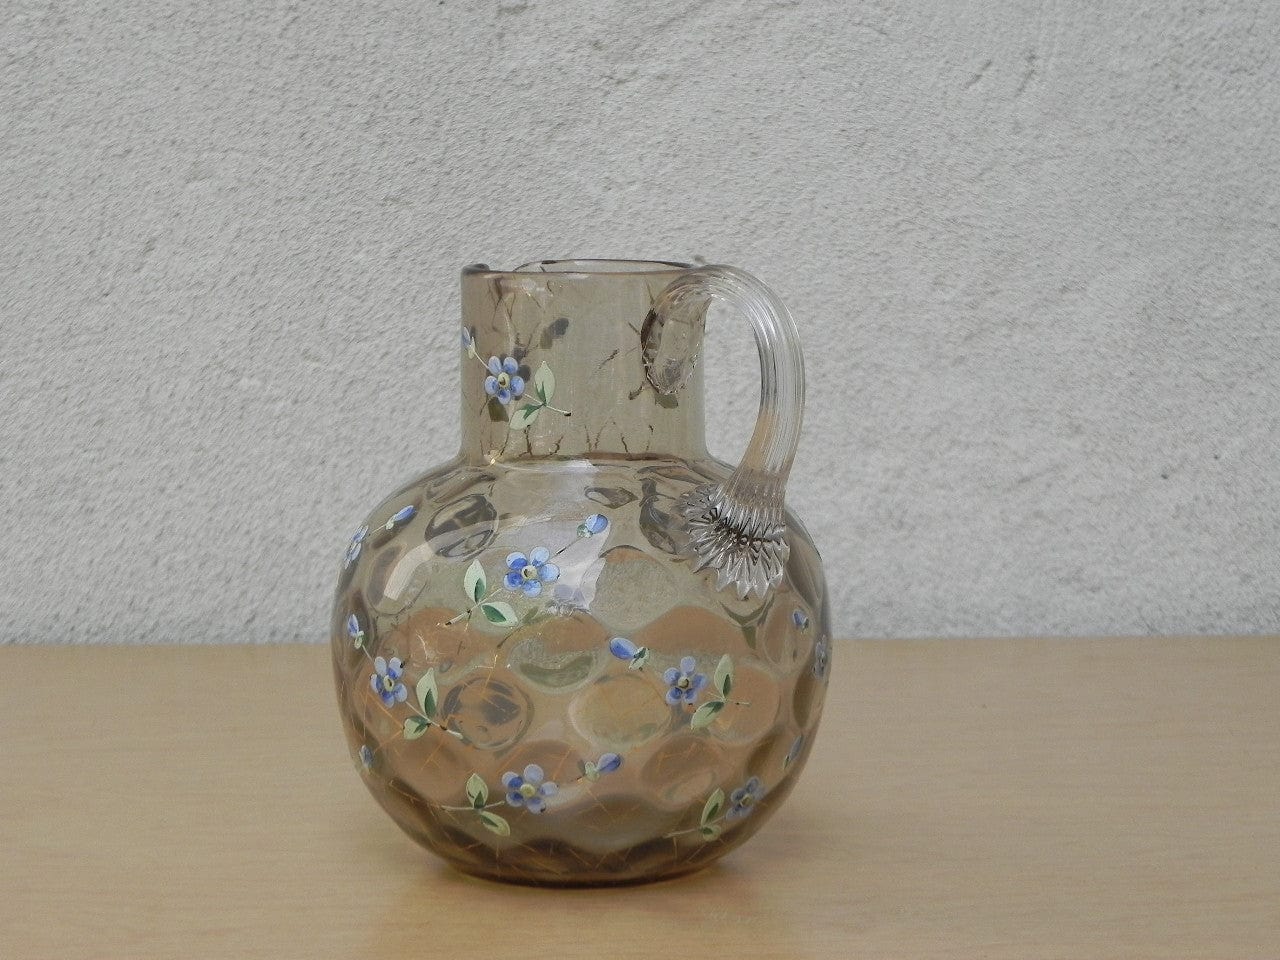 Small Round Honeycomb Glass Pitcher with Hand painted Blue Flowers - I Like  Mikes Mid Century Modern